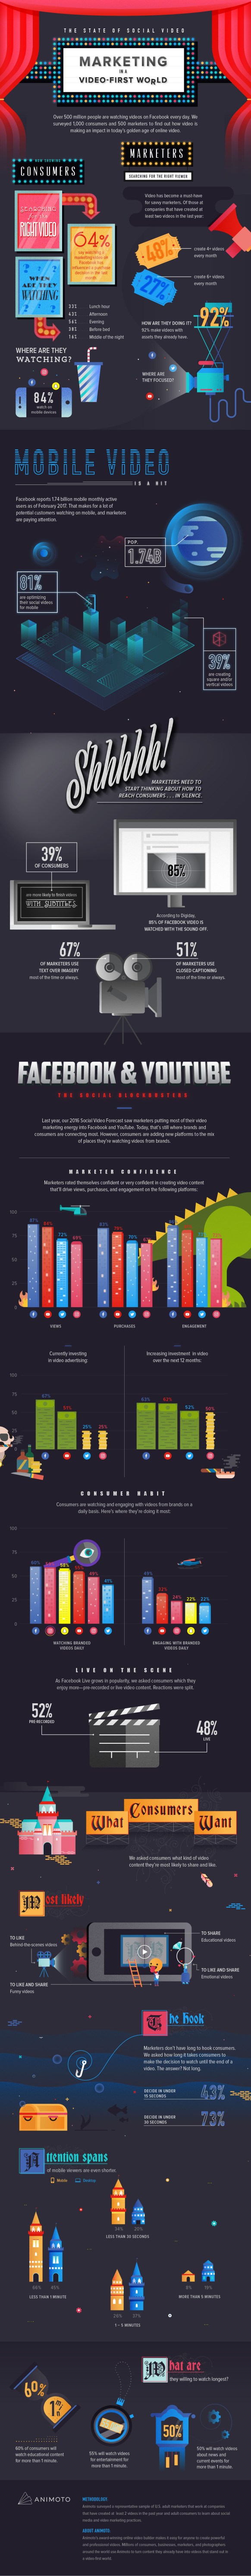 The state of social video - infographic